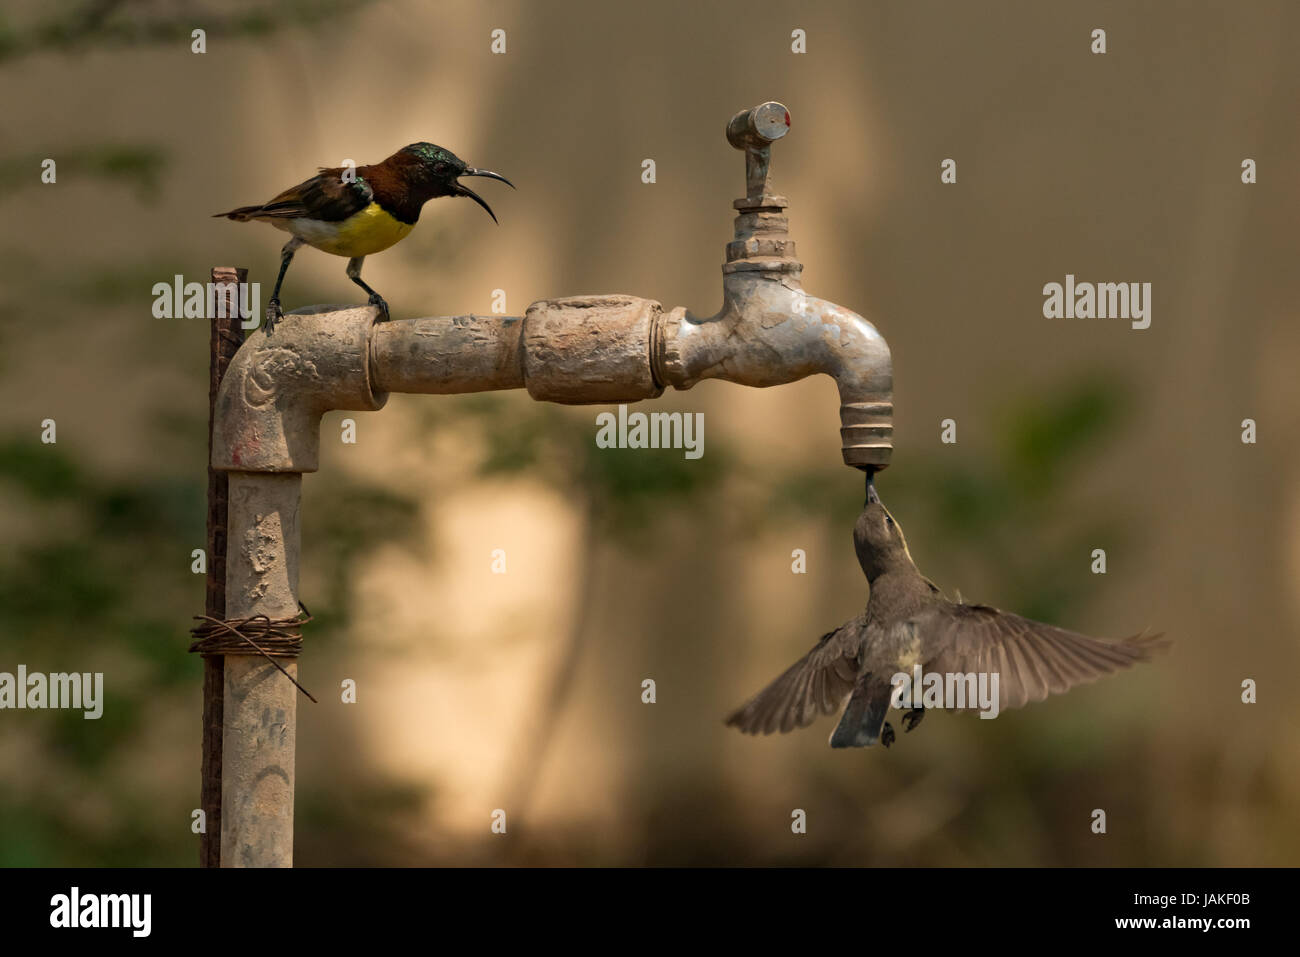 Two sunbirds compete to drink from tap Stock Photo